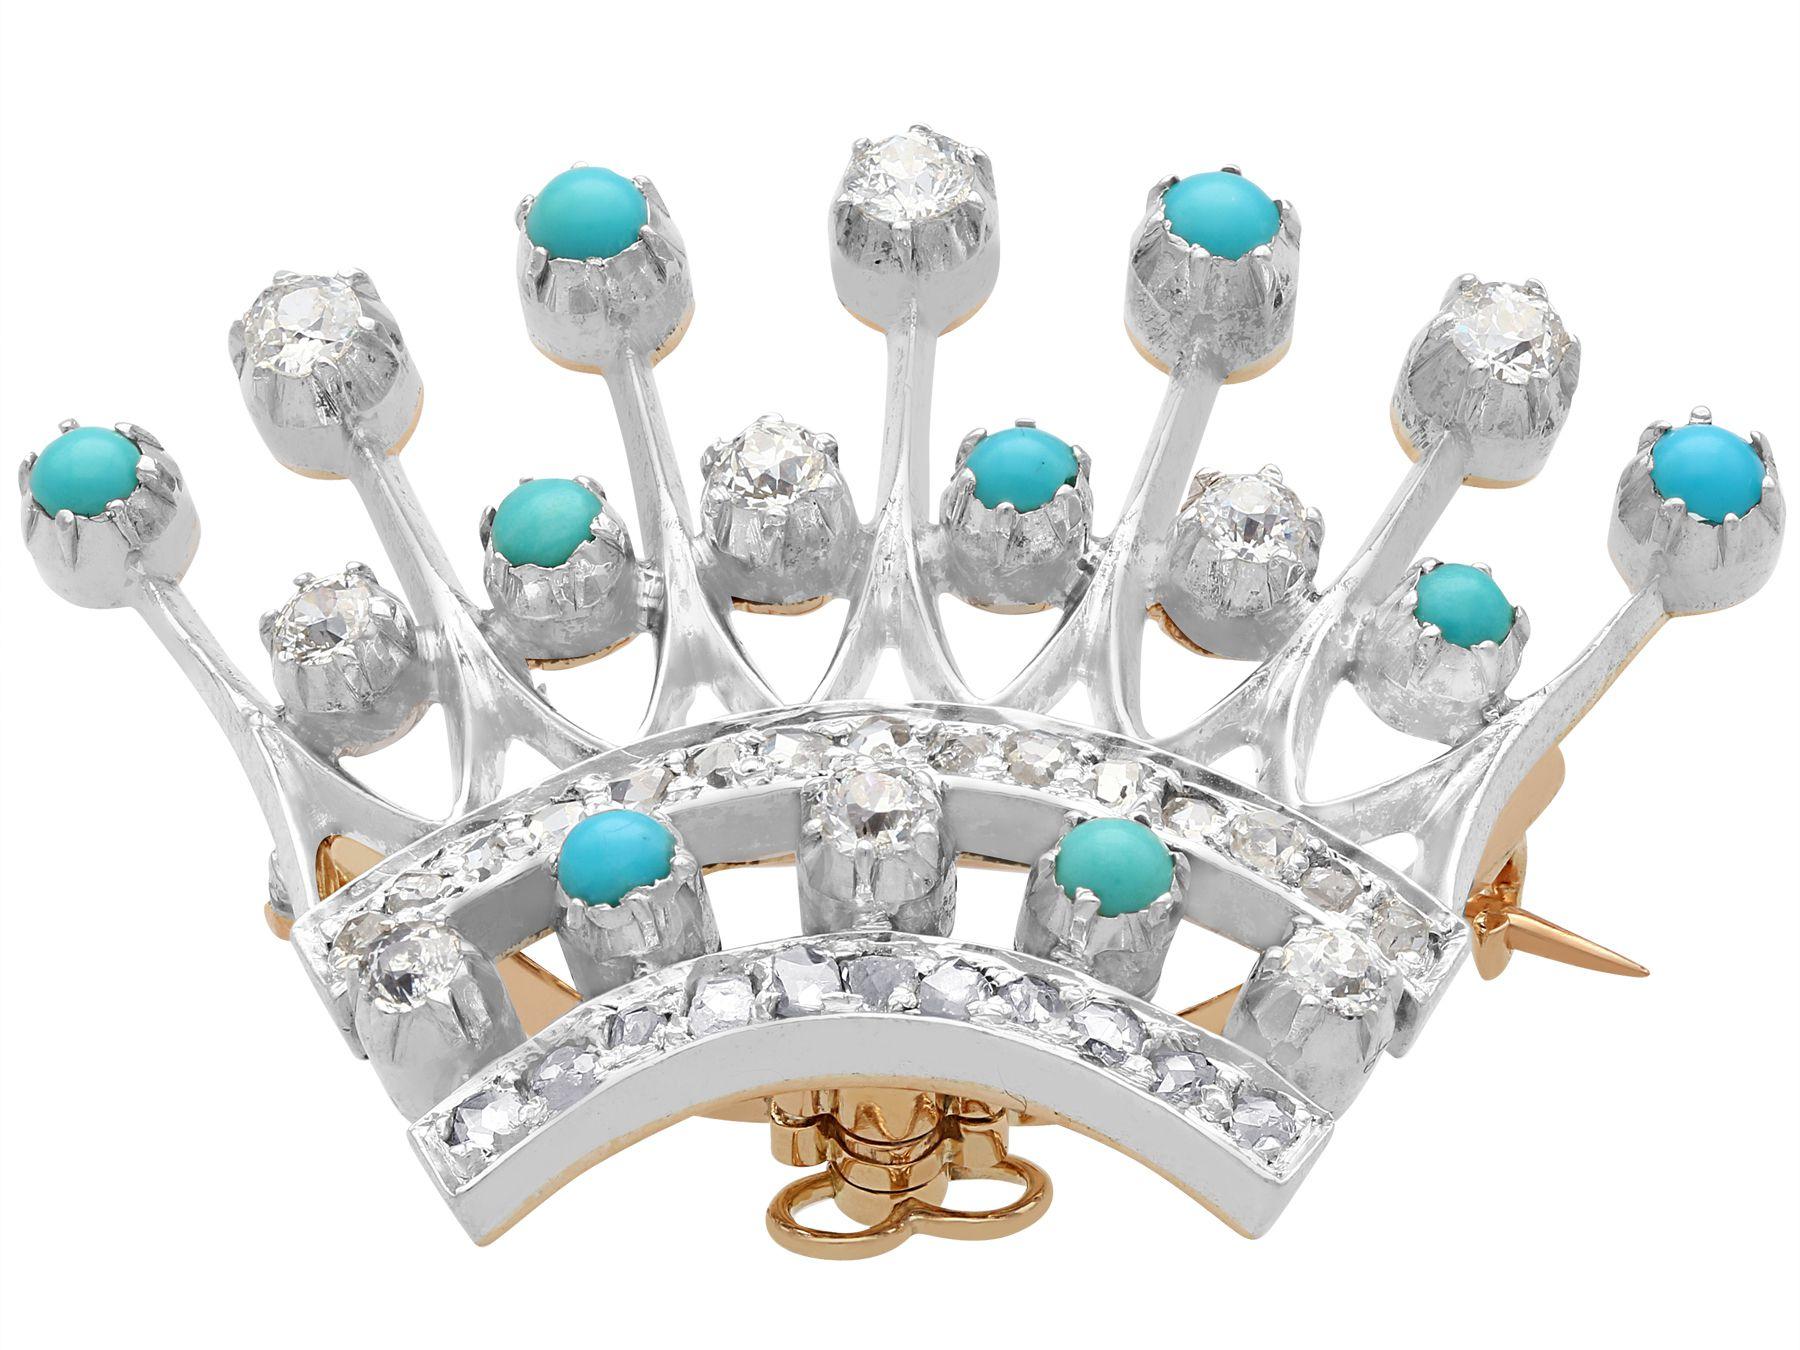 A fine and impressive antique Victorian 2.40 carat diamond and turquoise, 12 karat yellow gold, silver set 'crown' brooch; part of our antique jewelry and estate jewelry collections

This fine and impressive Victorian crown brooch has been crafted